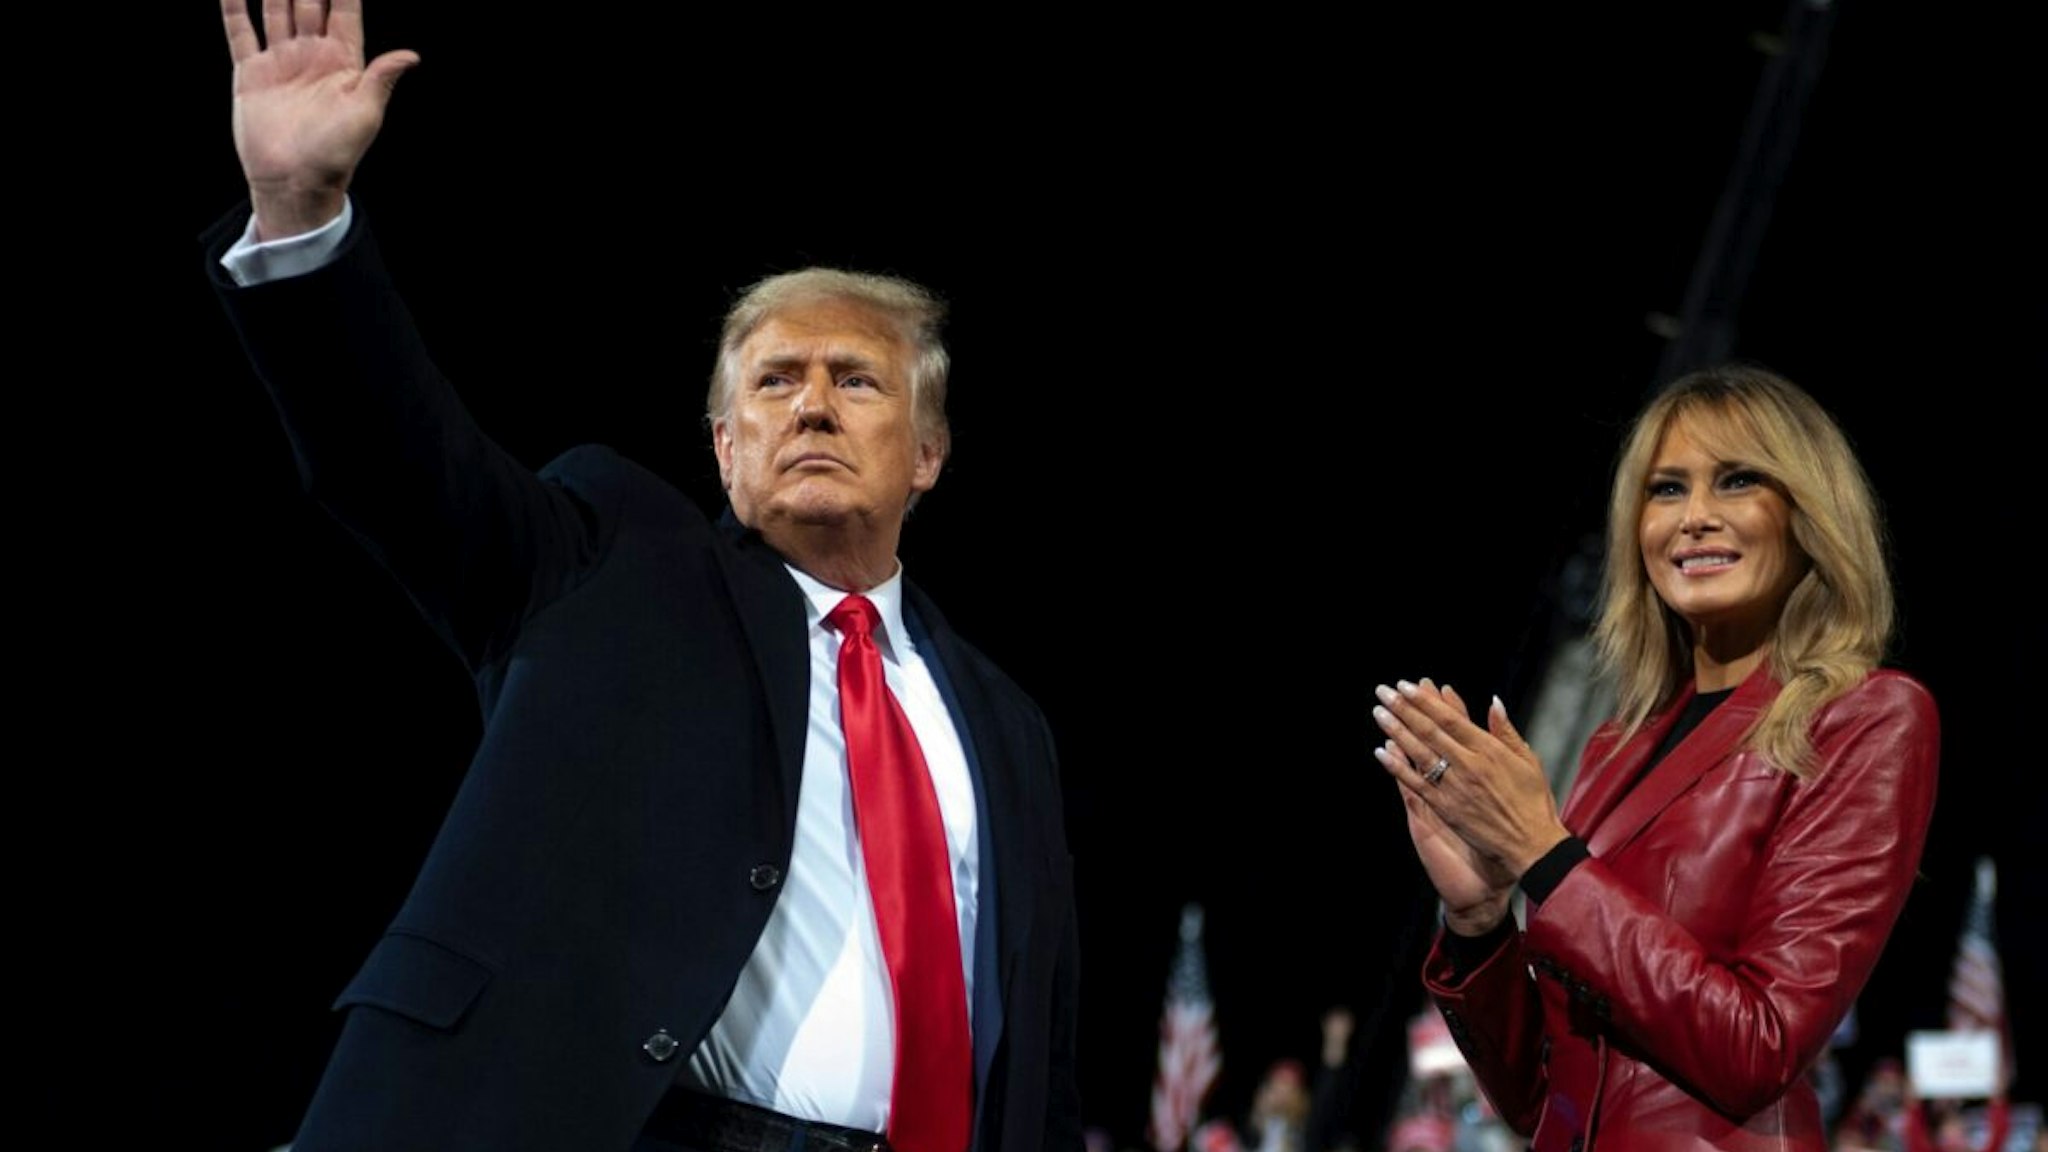 US President Donald Trump waves as he leaves the stage with First Lady Melania Trump at the end of a rally to support Republican Senate candidates at Valdosta Regional Airport in Valdosta, Georgia on December 5, 2020.